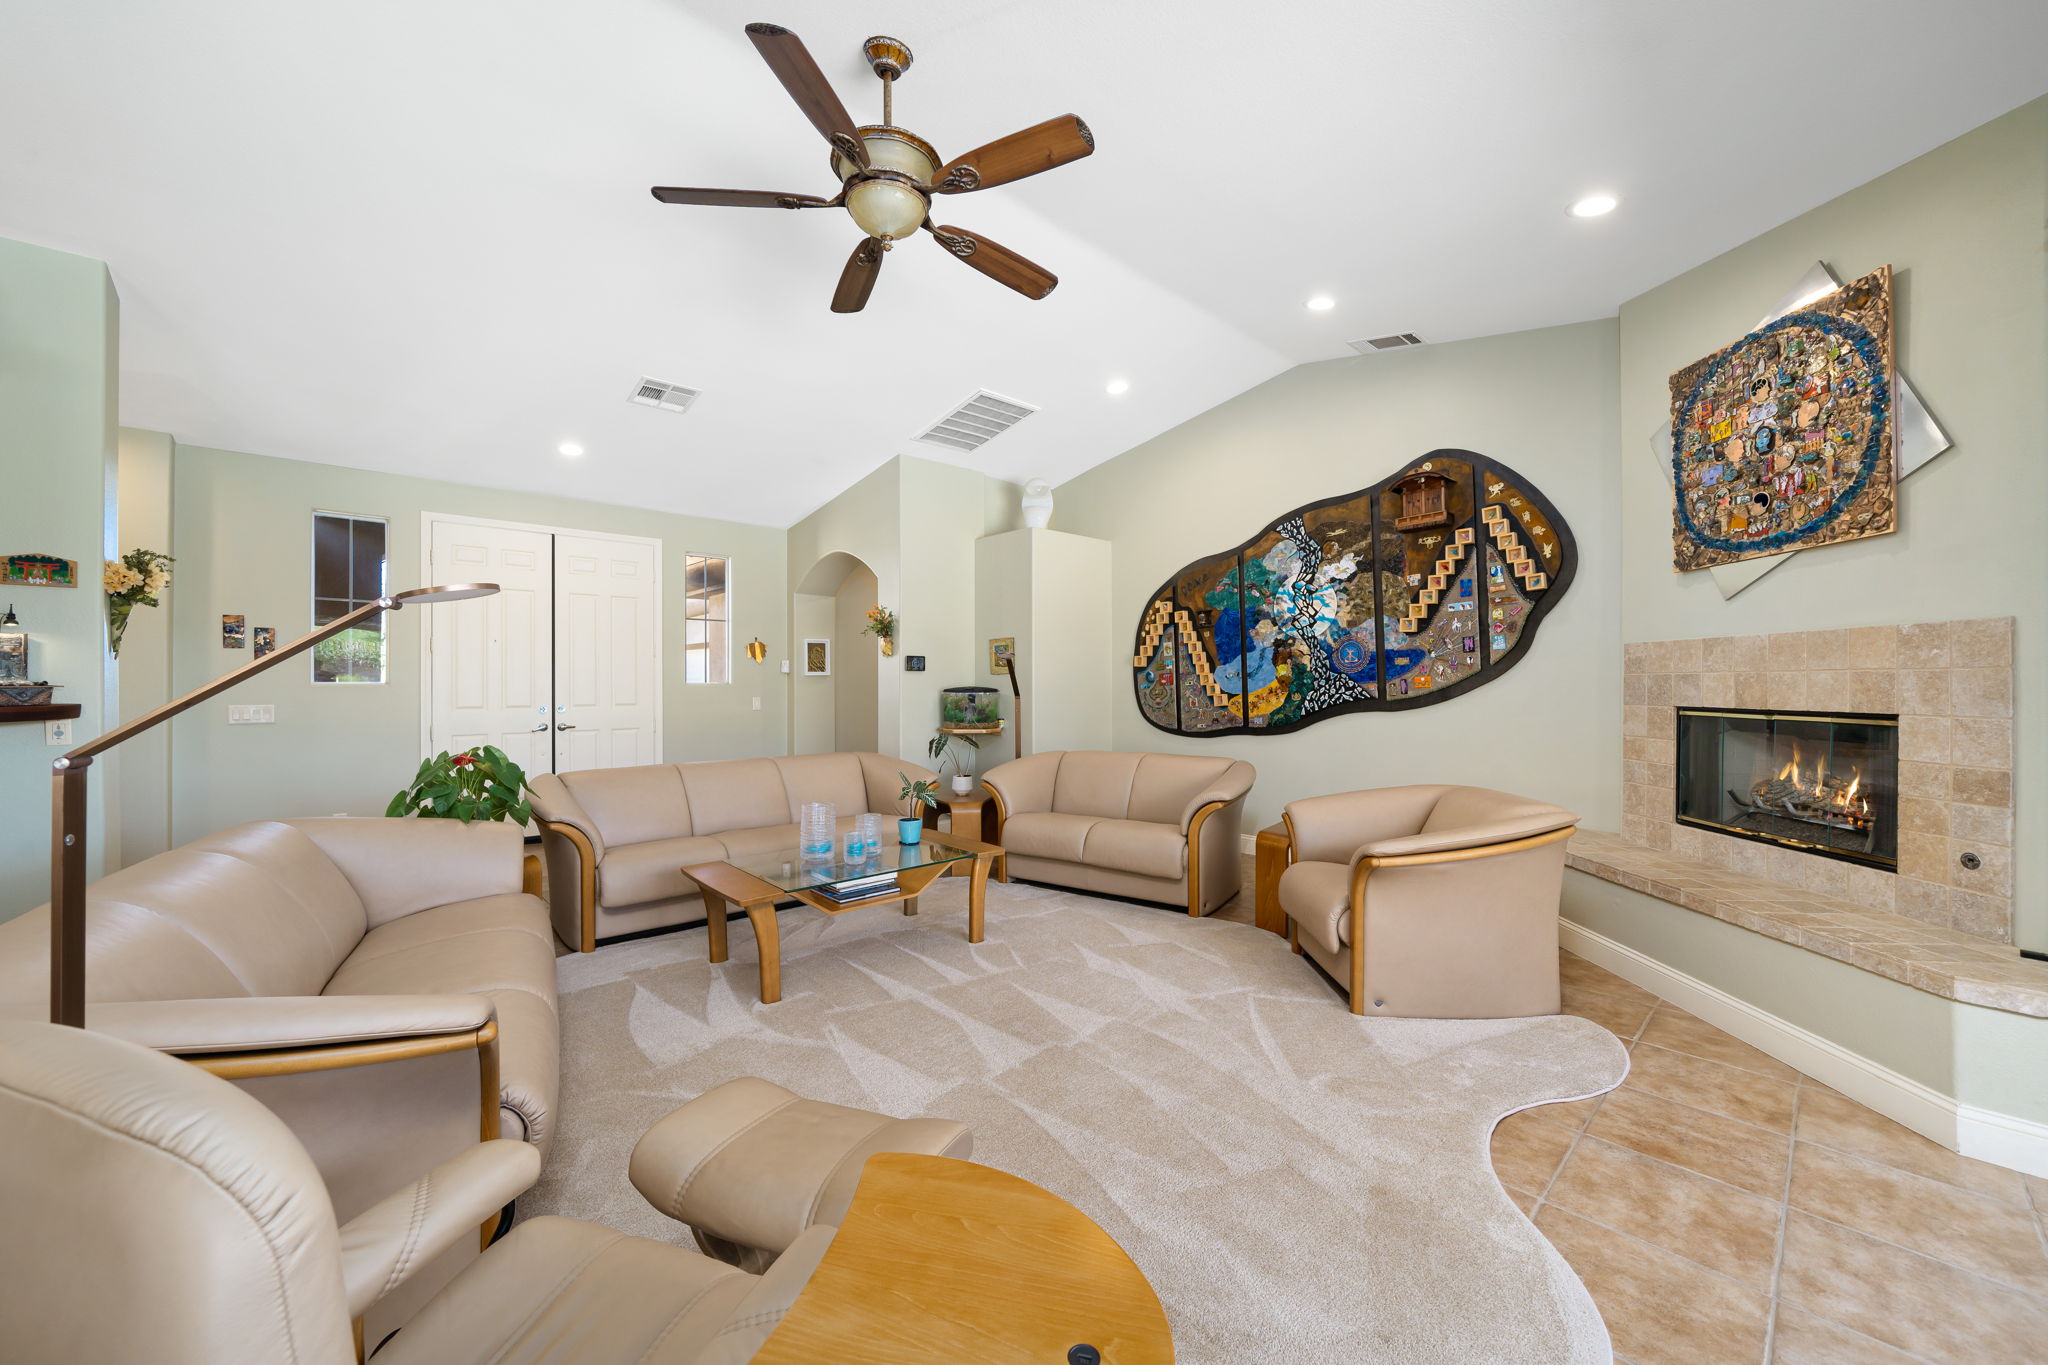 104 Clearwater Way, Rancho Mirage, CA 92270, USA Photo 20